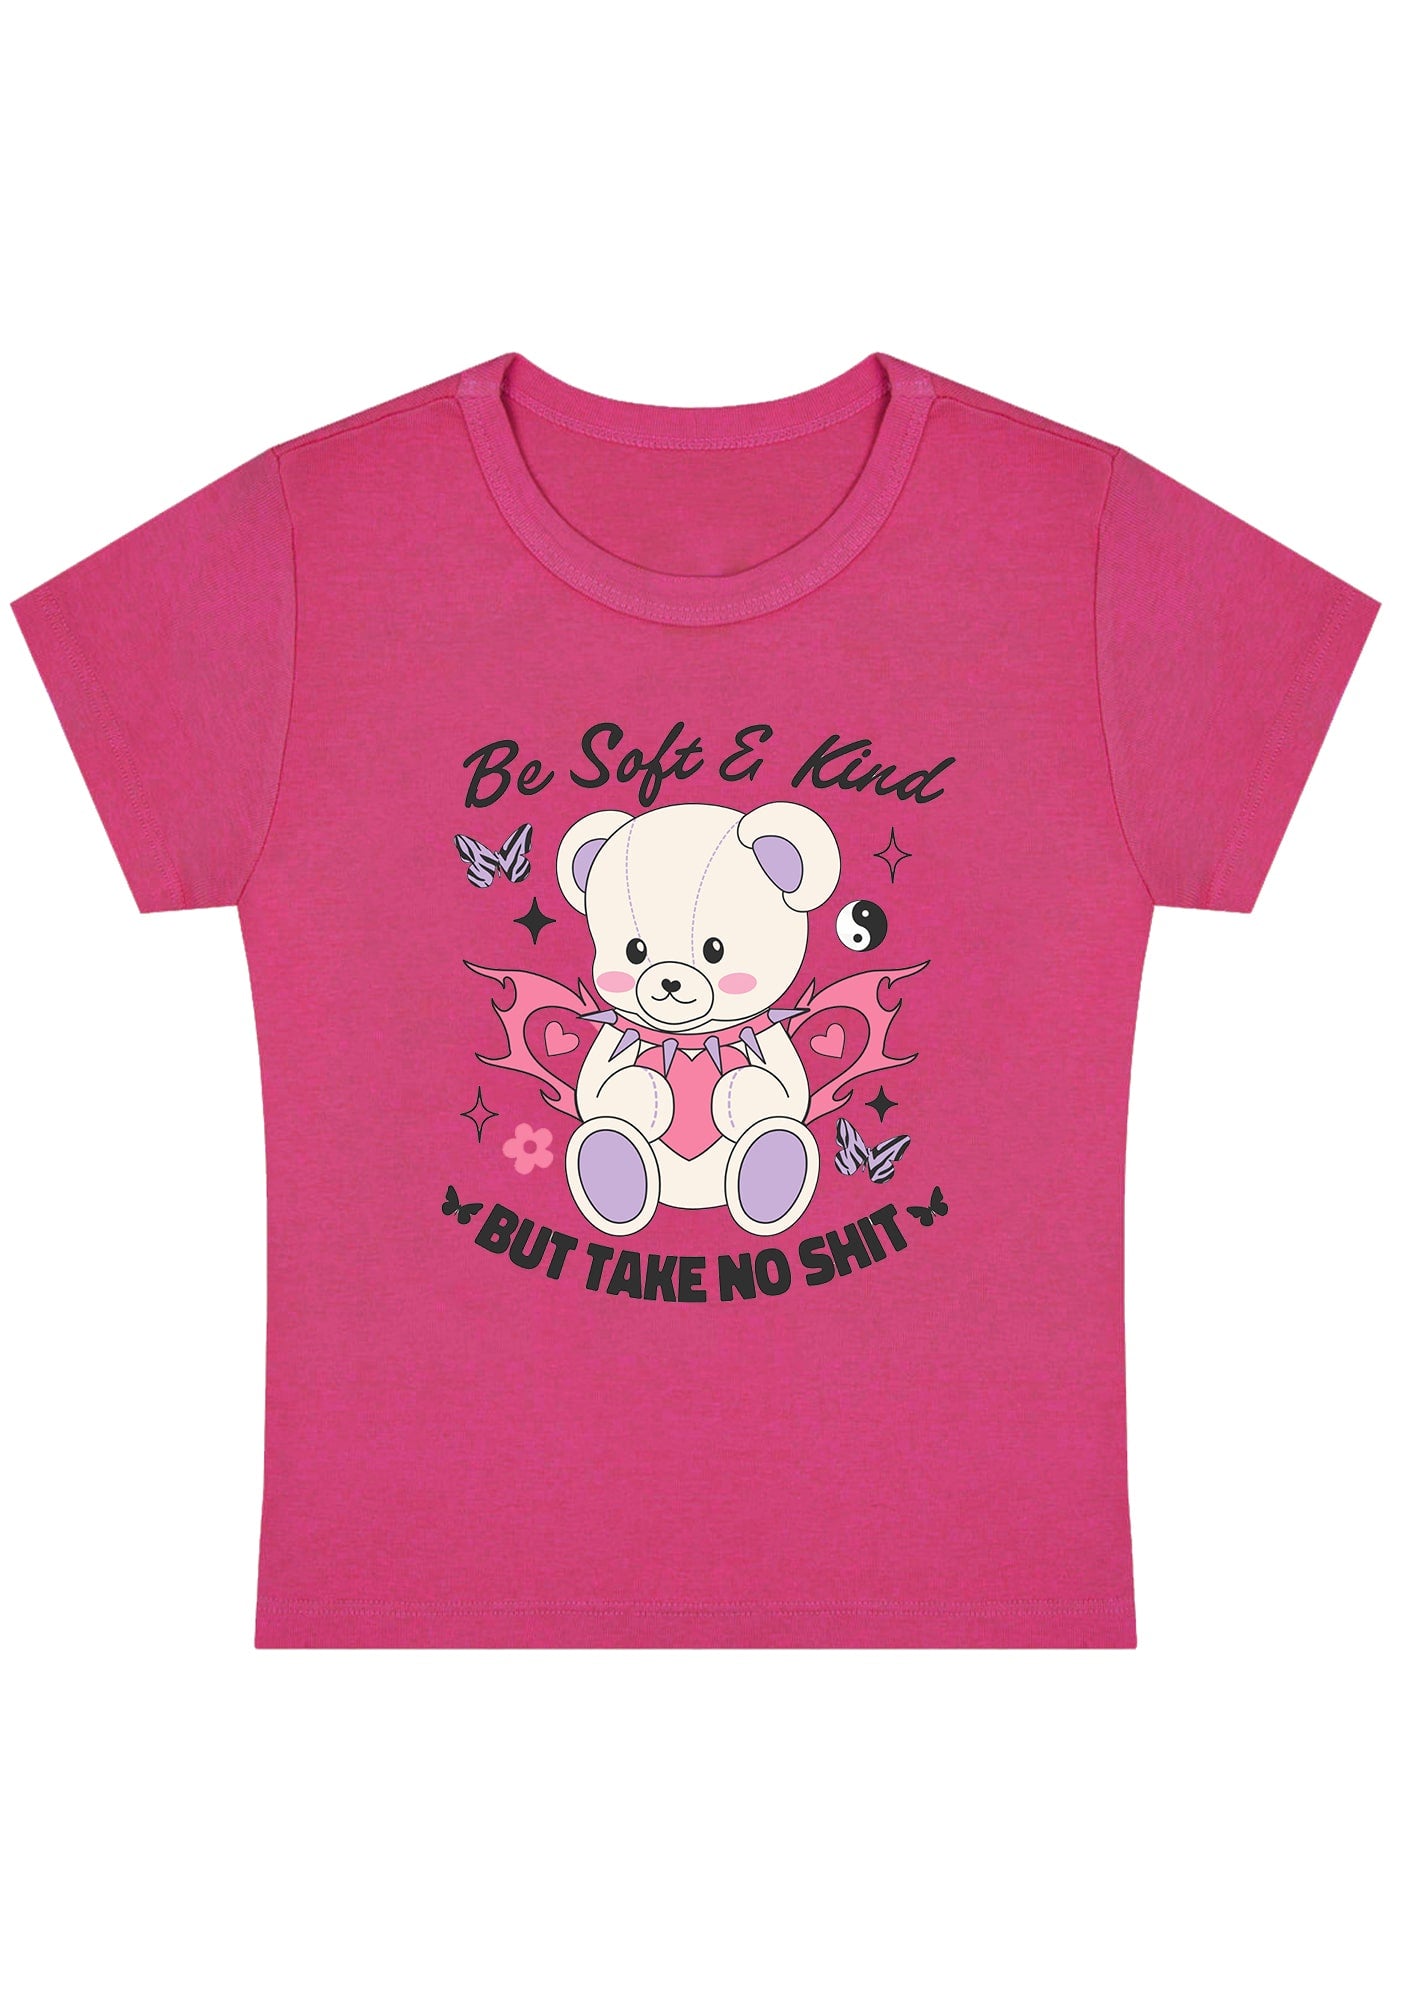 Be Soft And Kind Y2K Baby Tee